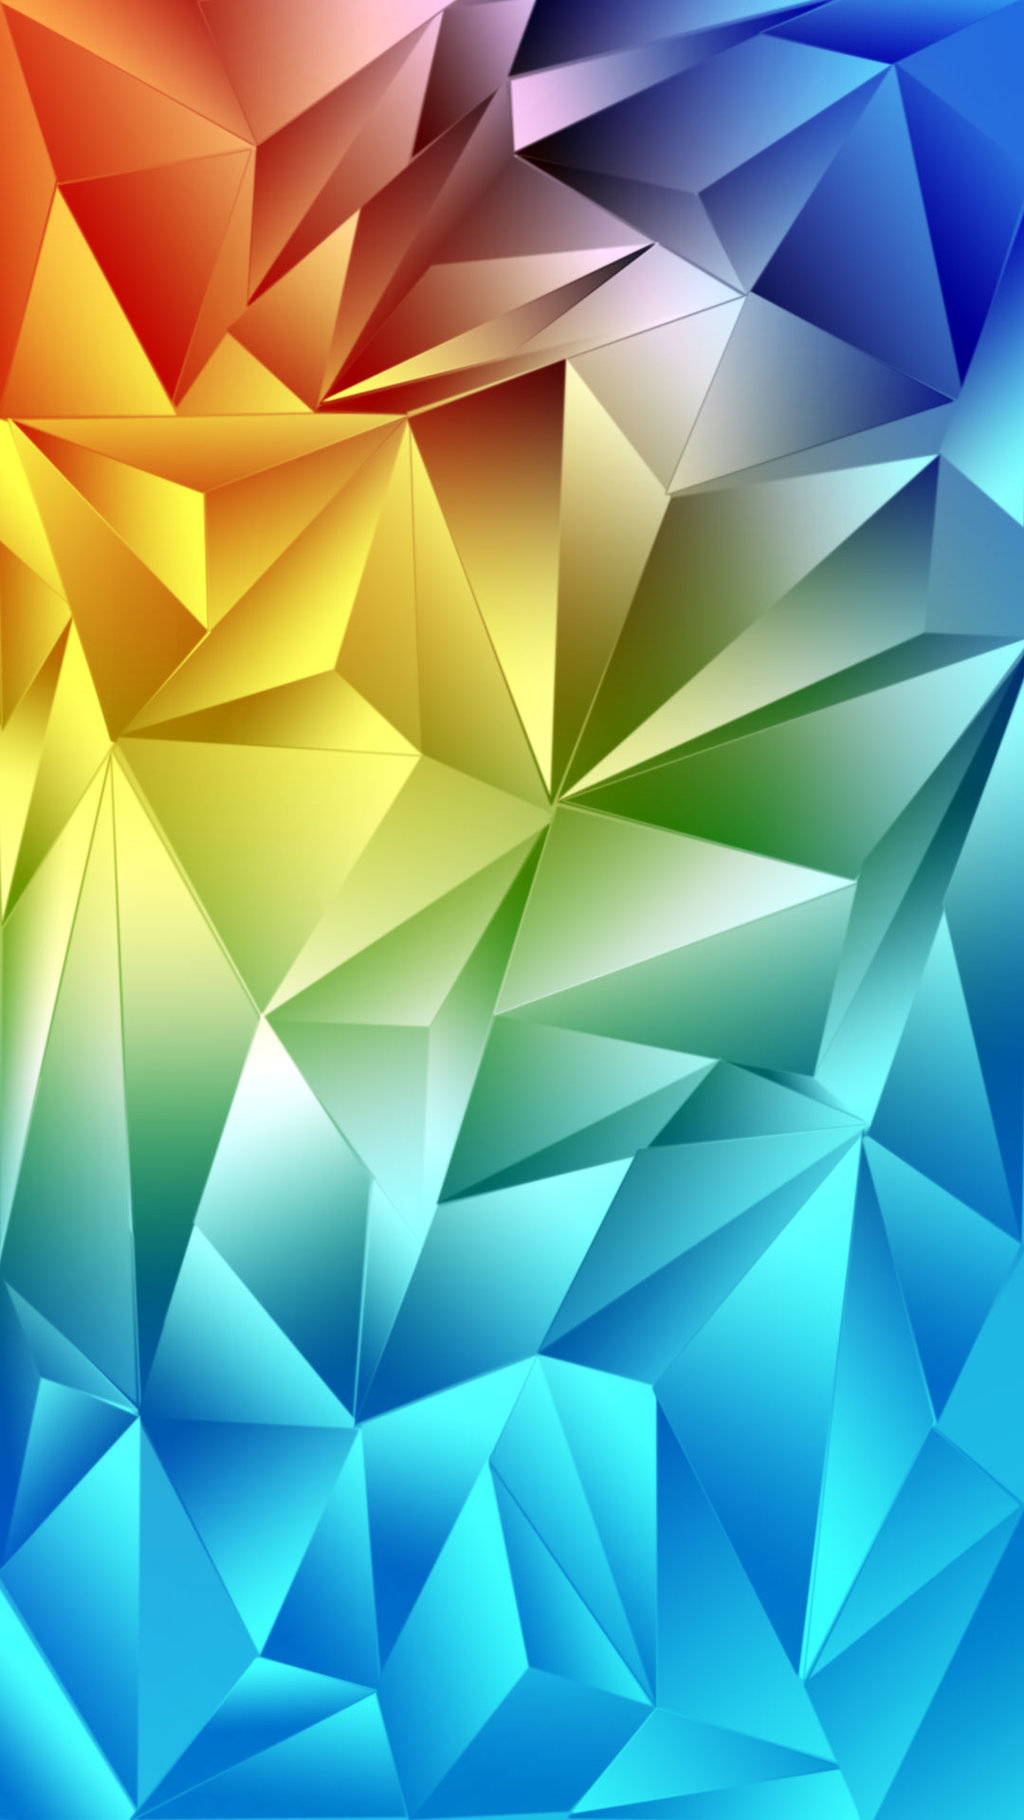 Samsung Galaxy S5 inspired wallpaper by AdnanPS on